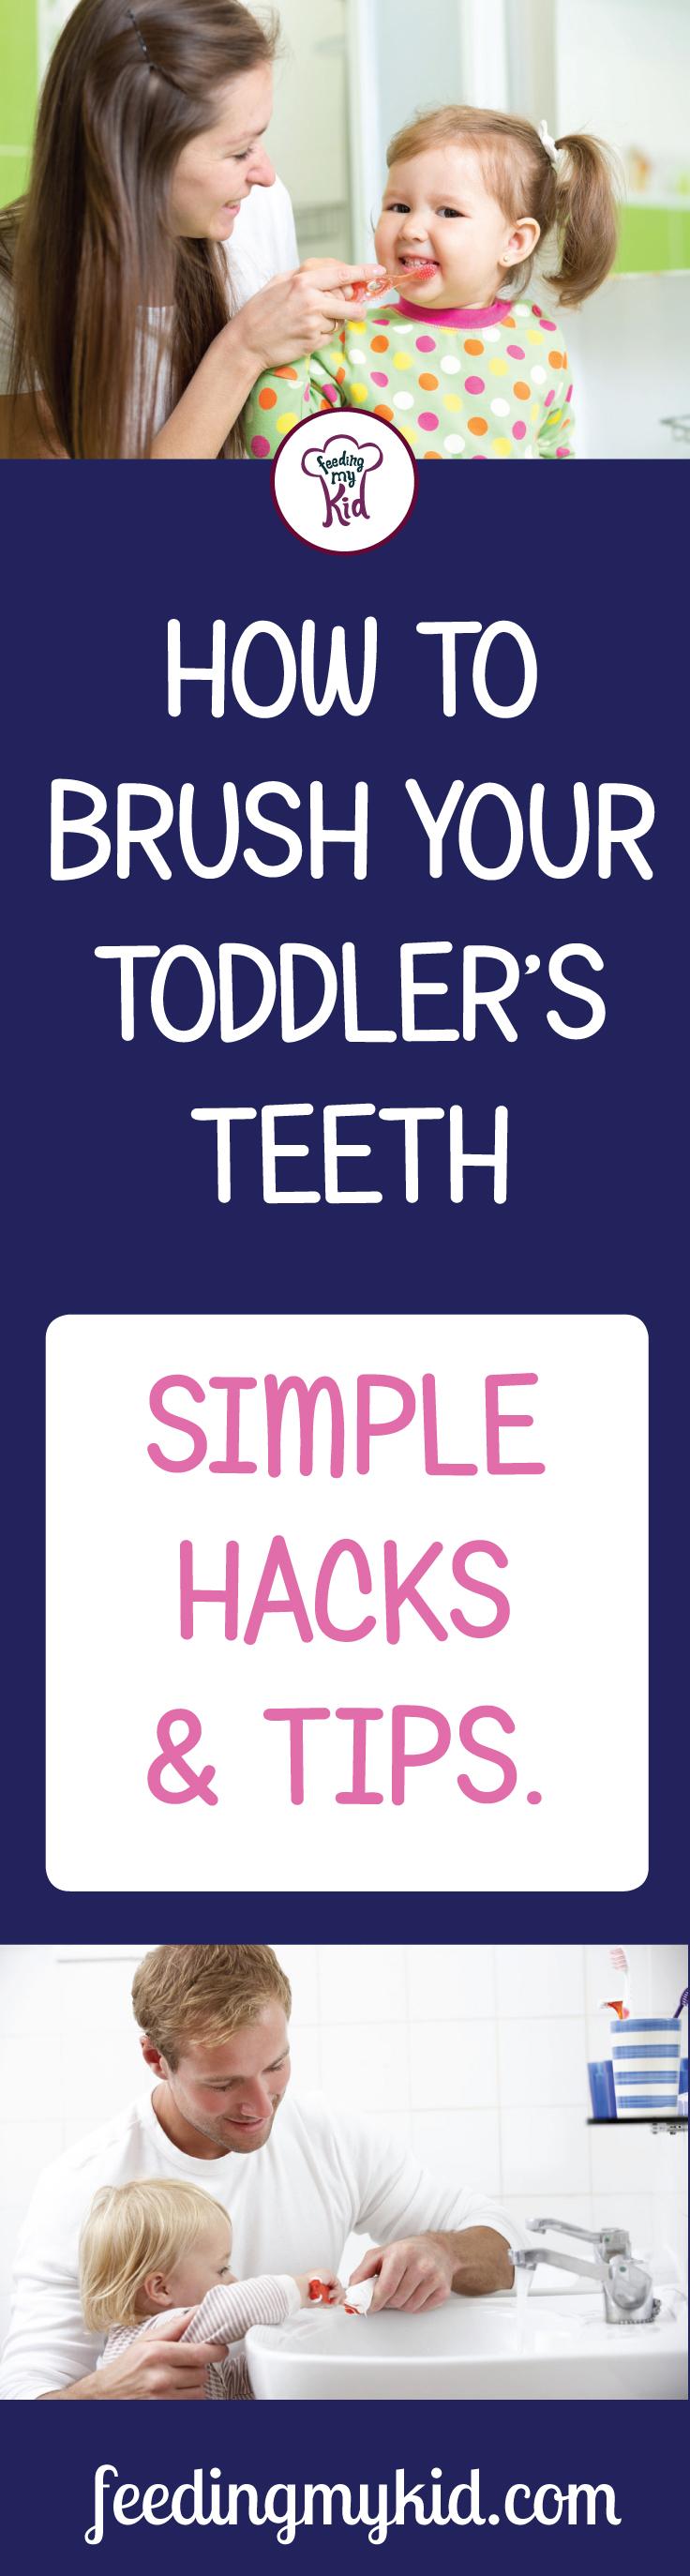 How to Brush Your Toddler's Teeth. Simple Hacks & Tips.